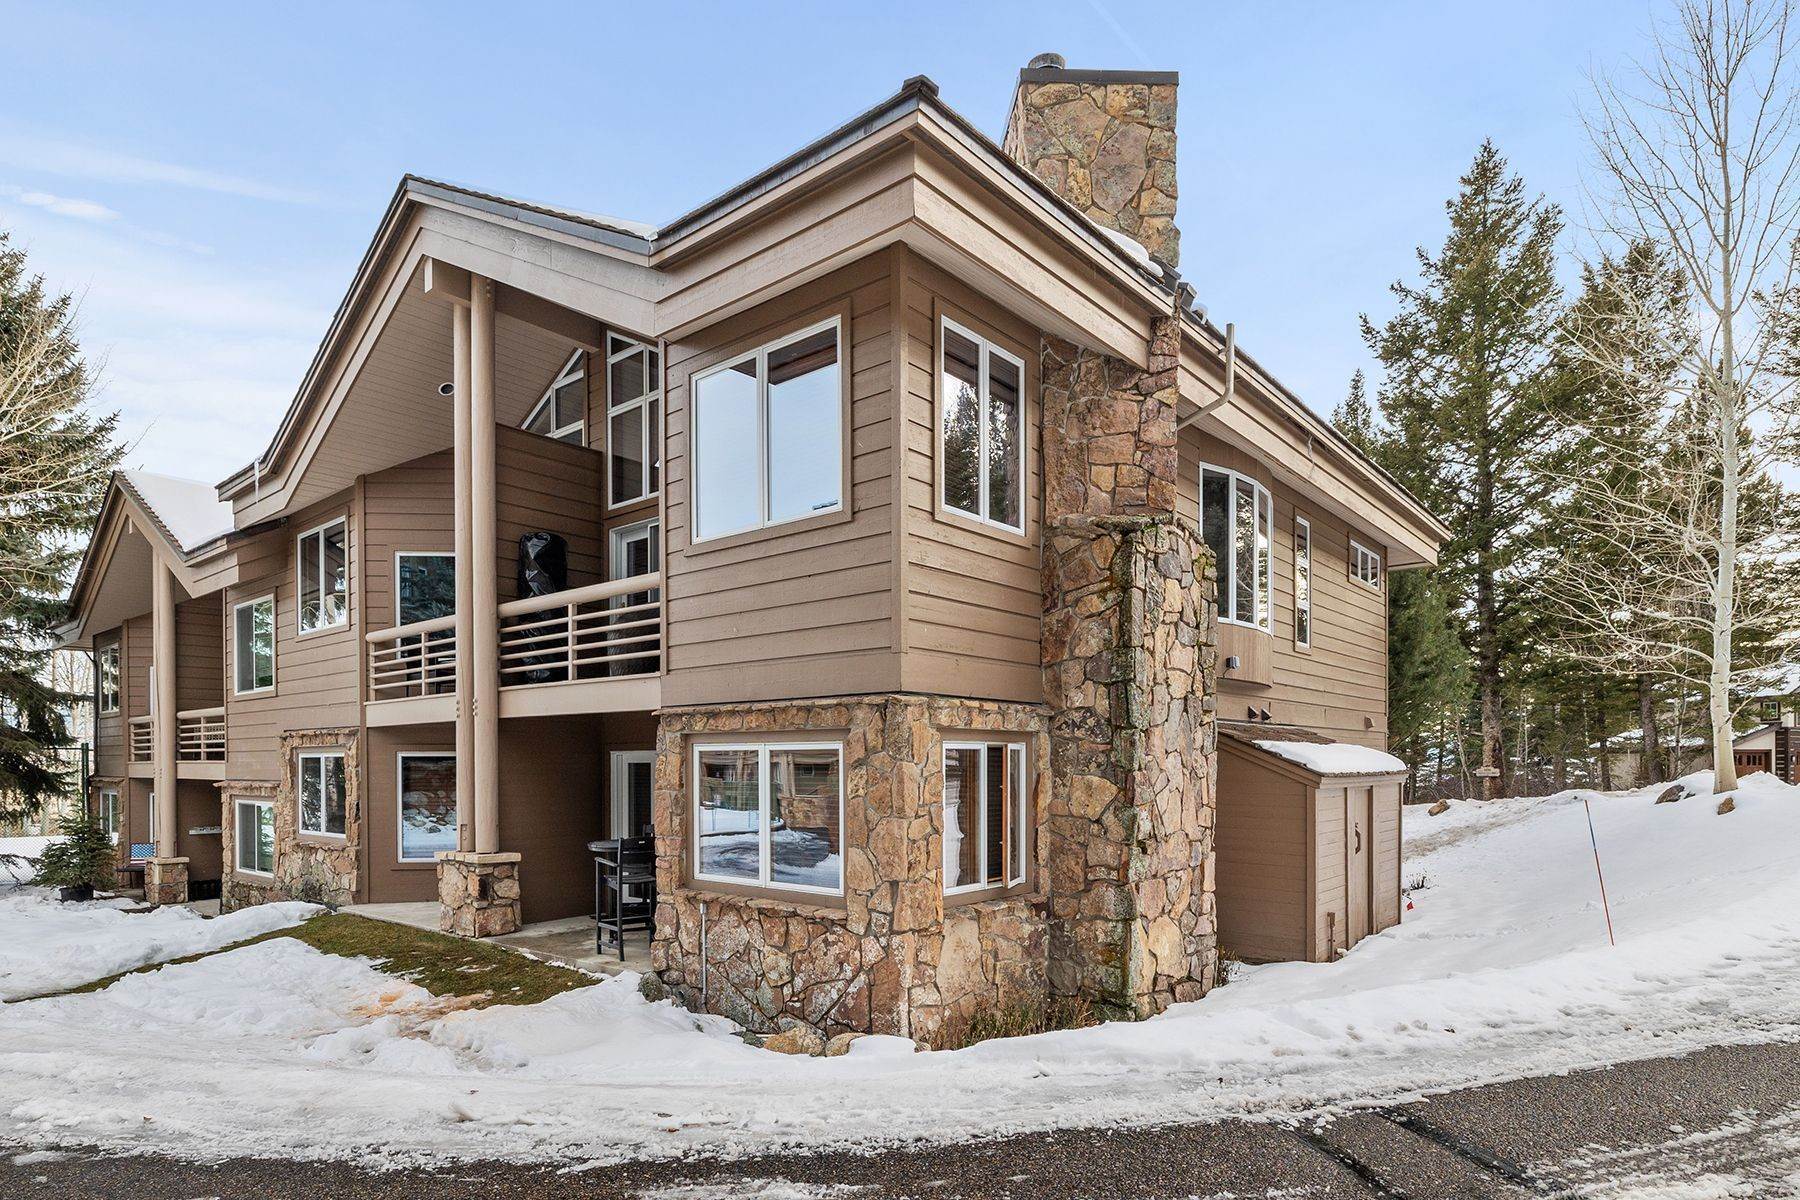 2. Townhouse for Sale at Tram Tower #4 - True Ski-In, Ski-Out 3527 W McCollister Drive Teton Village, Wyoming 83025 United States